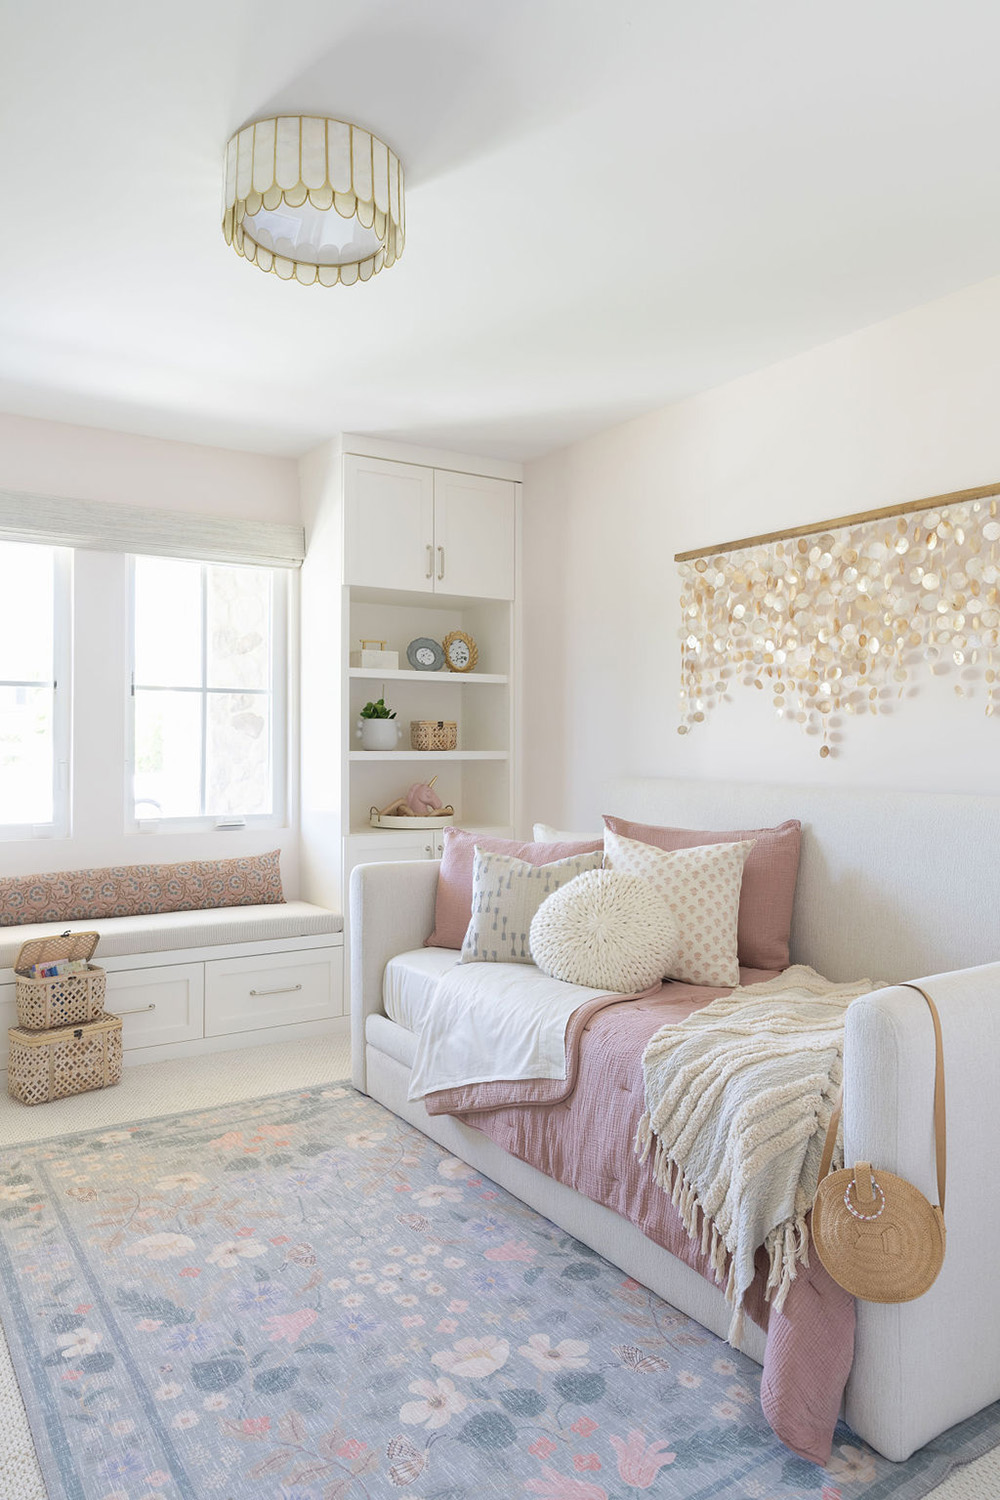 childrens bedroom design with floral rug and unique shimmery decor